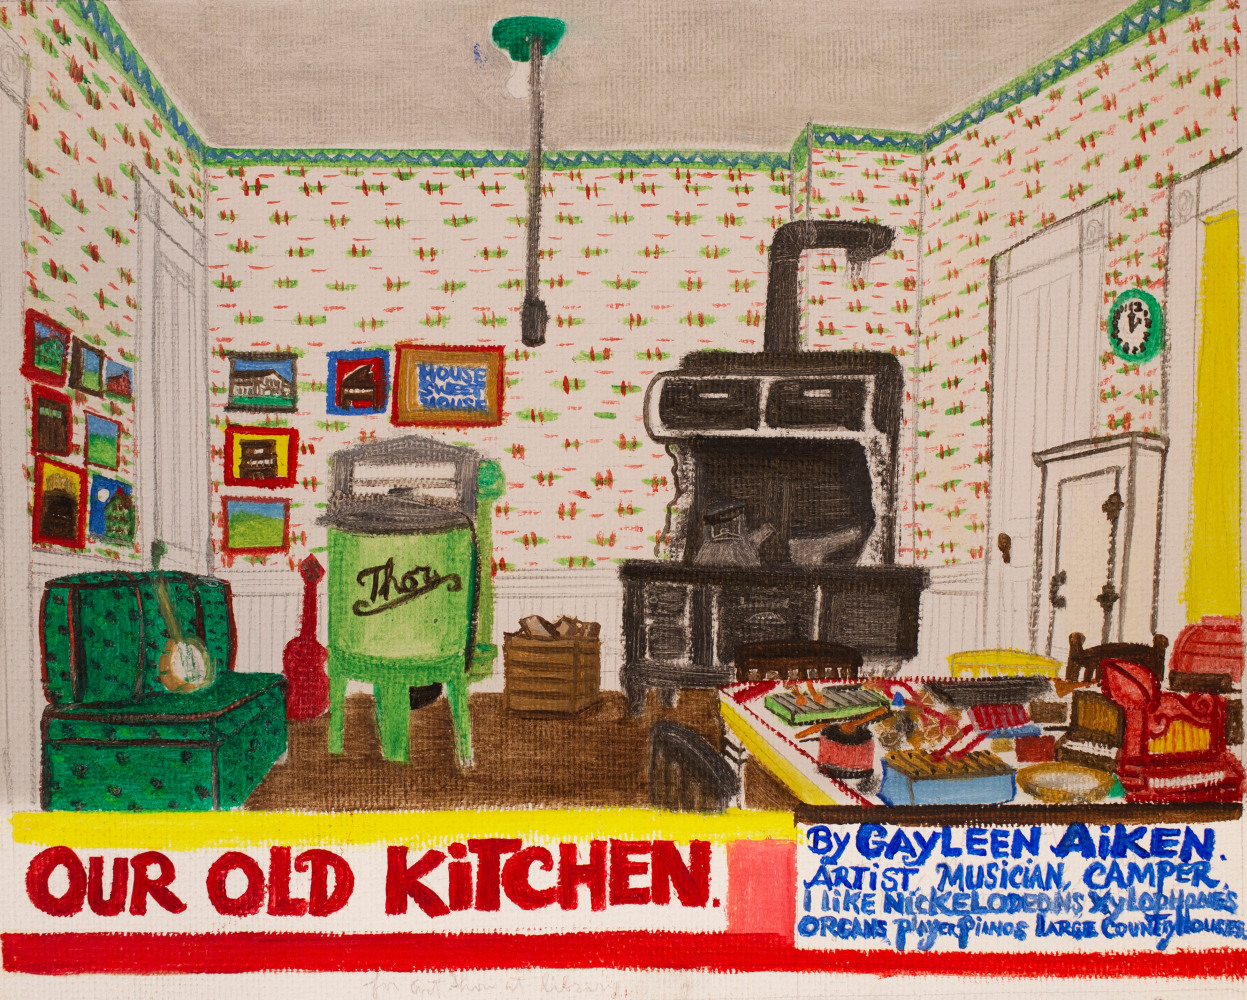 Our Old Kitchen, 1984
Oil on&amp;nbsp; unstretched canvas
8 x 10 inches